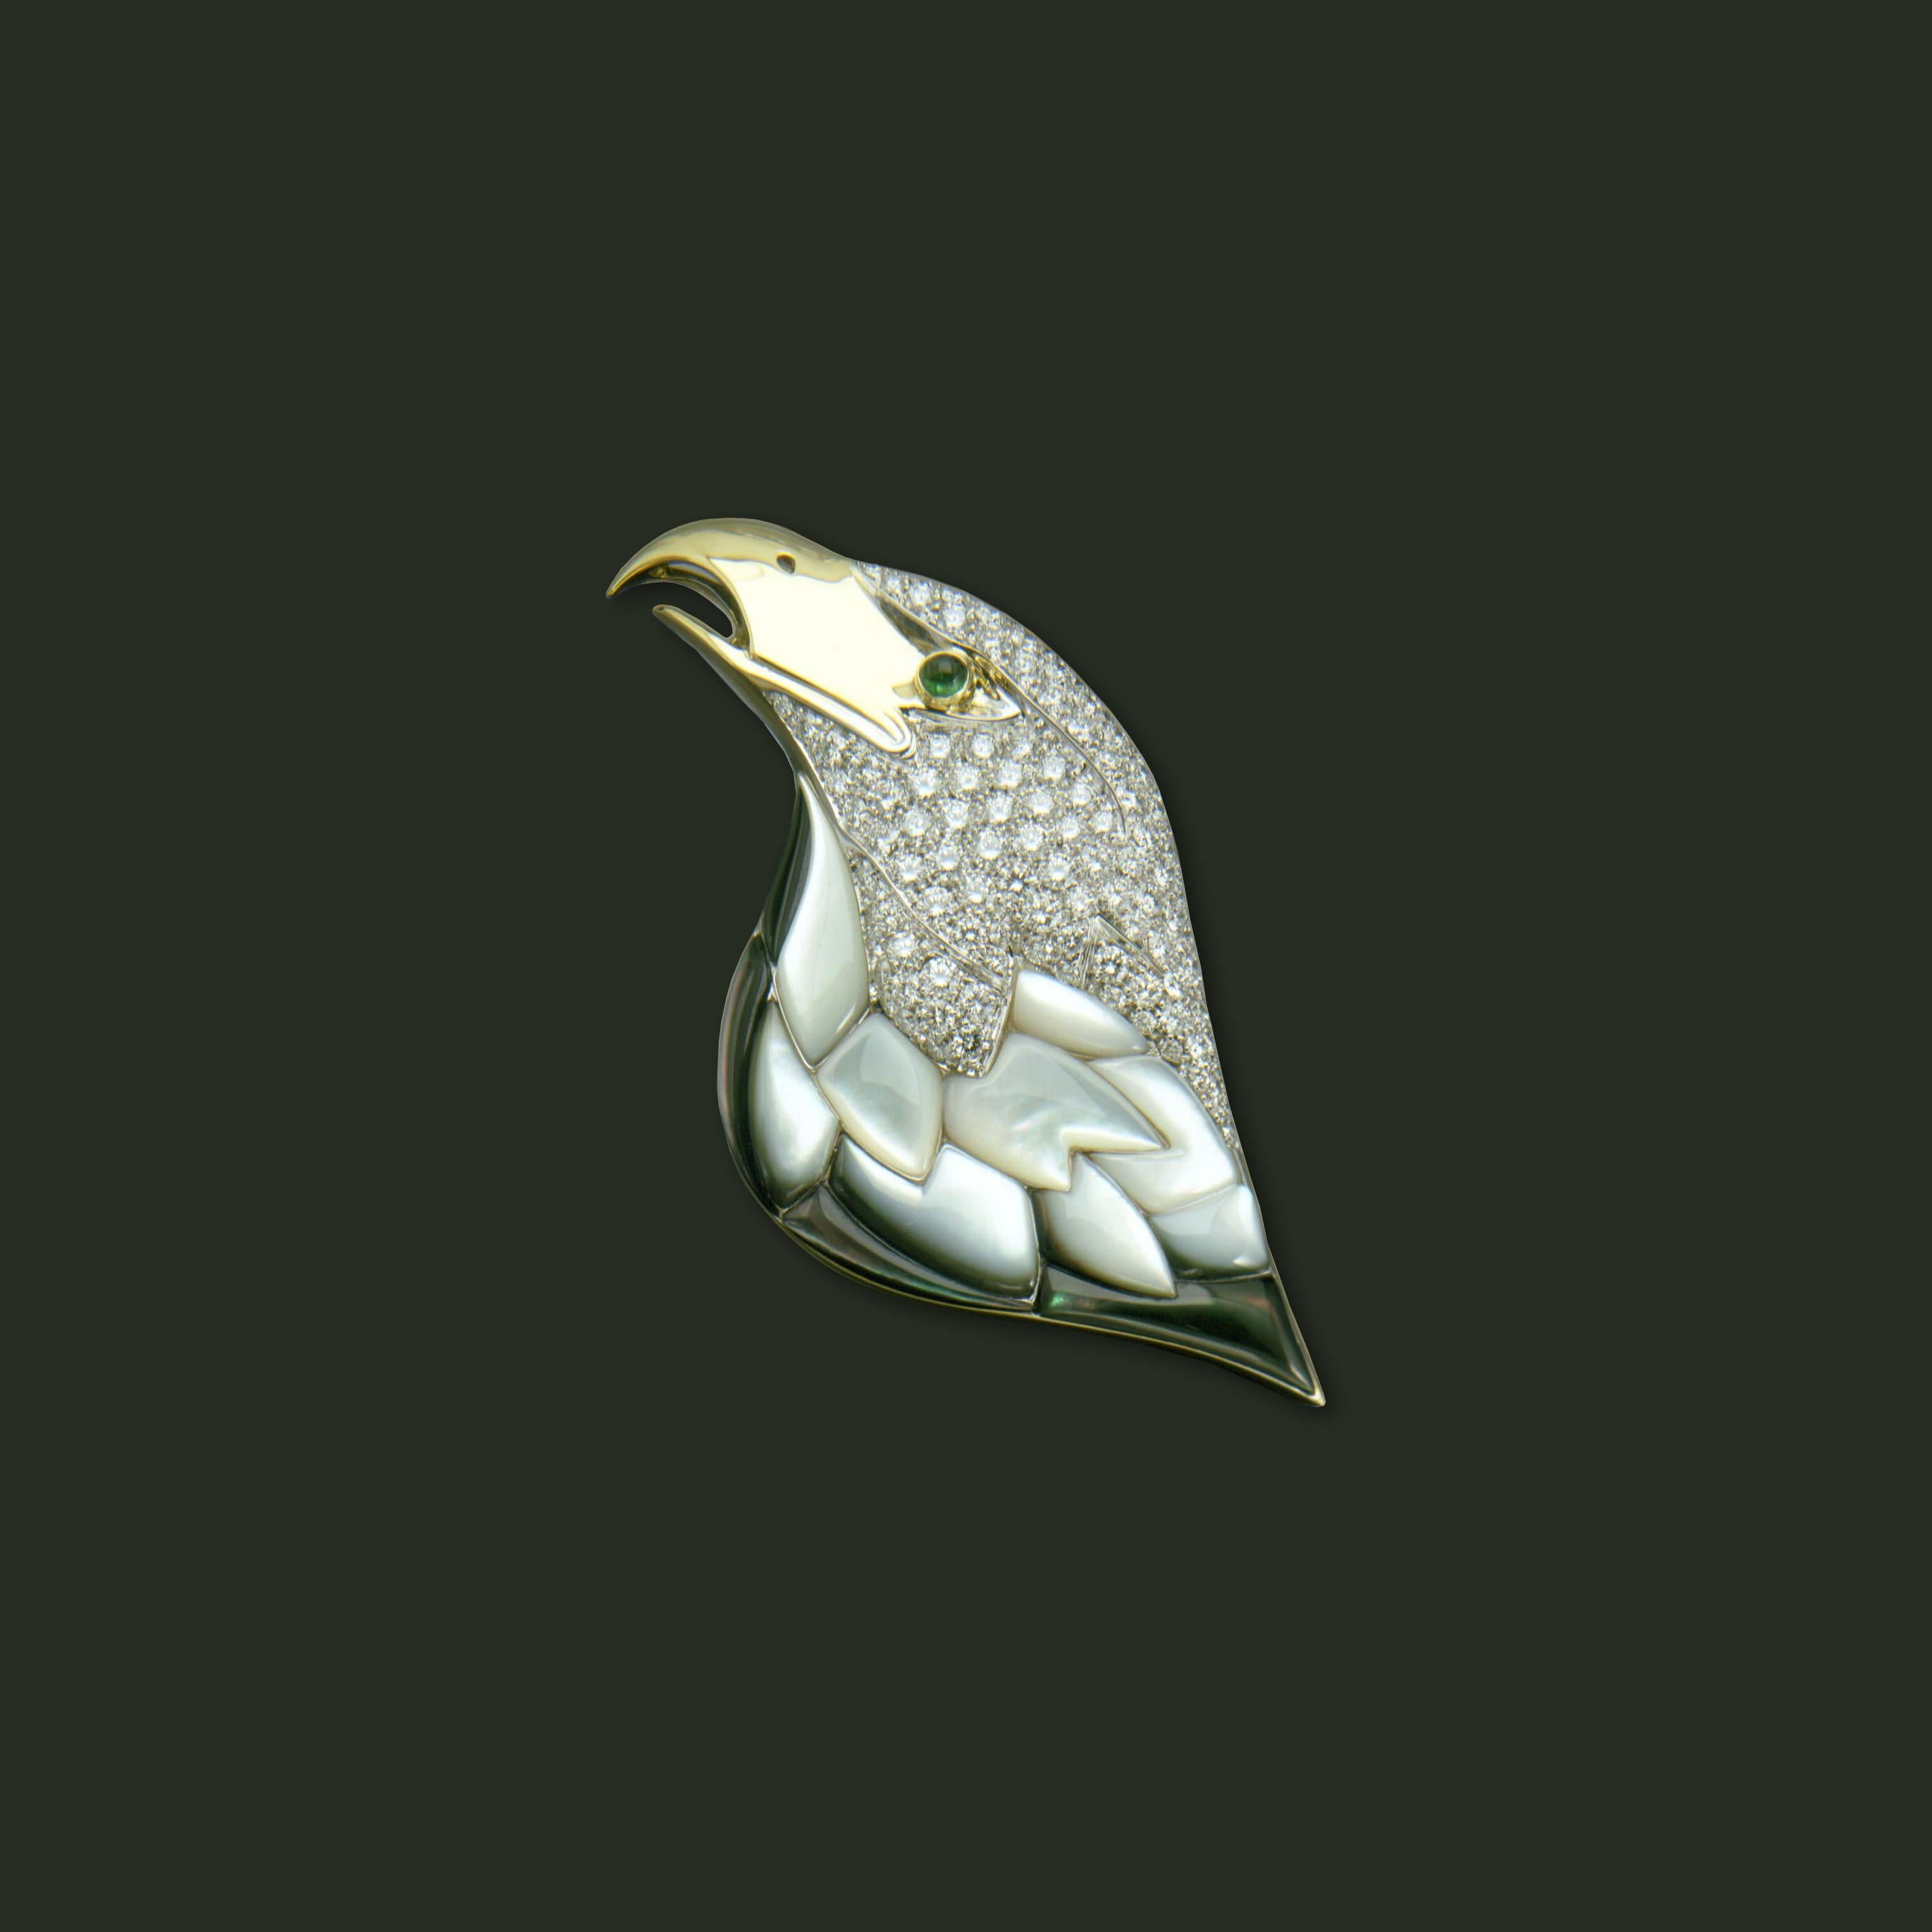 The wings of an eagle symbolize the balance and co-dependency between females and males, and how each gender must work unitedly in order to achieve harmonious results.
The wings are enriched by elements of mother-of-pearl gently shading from white